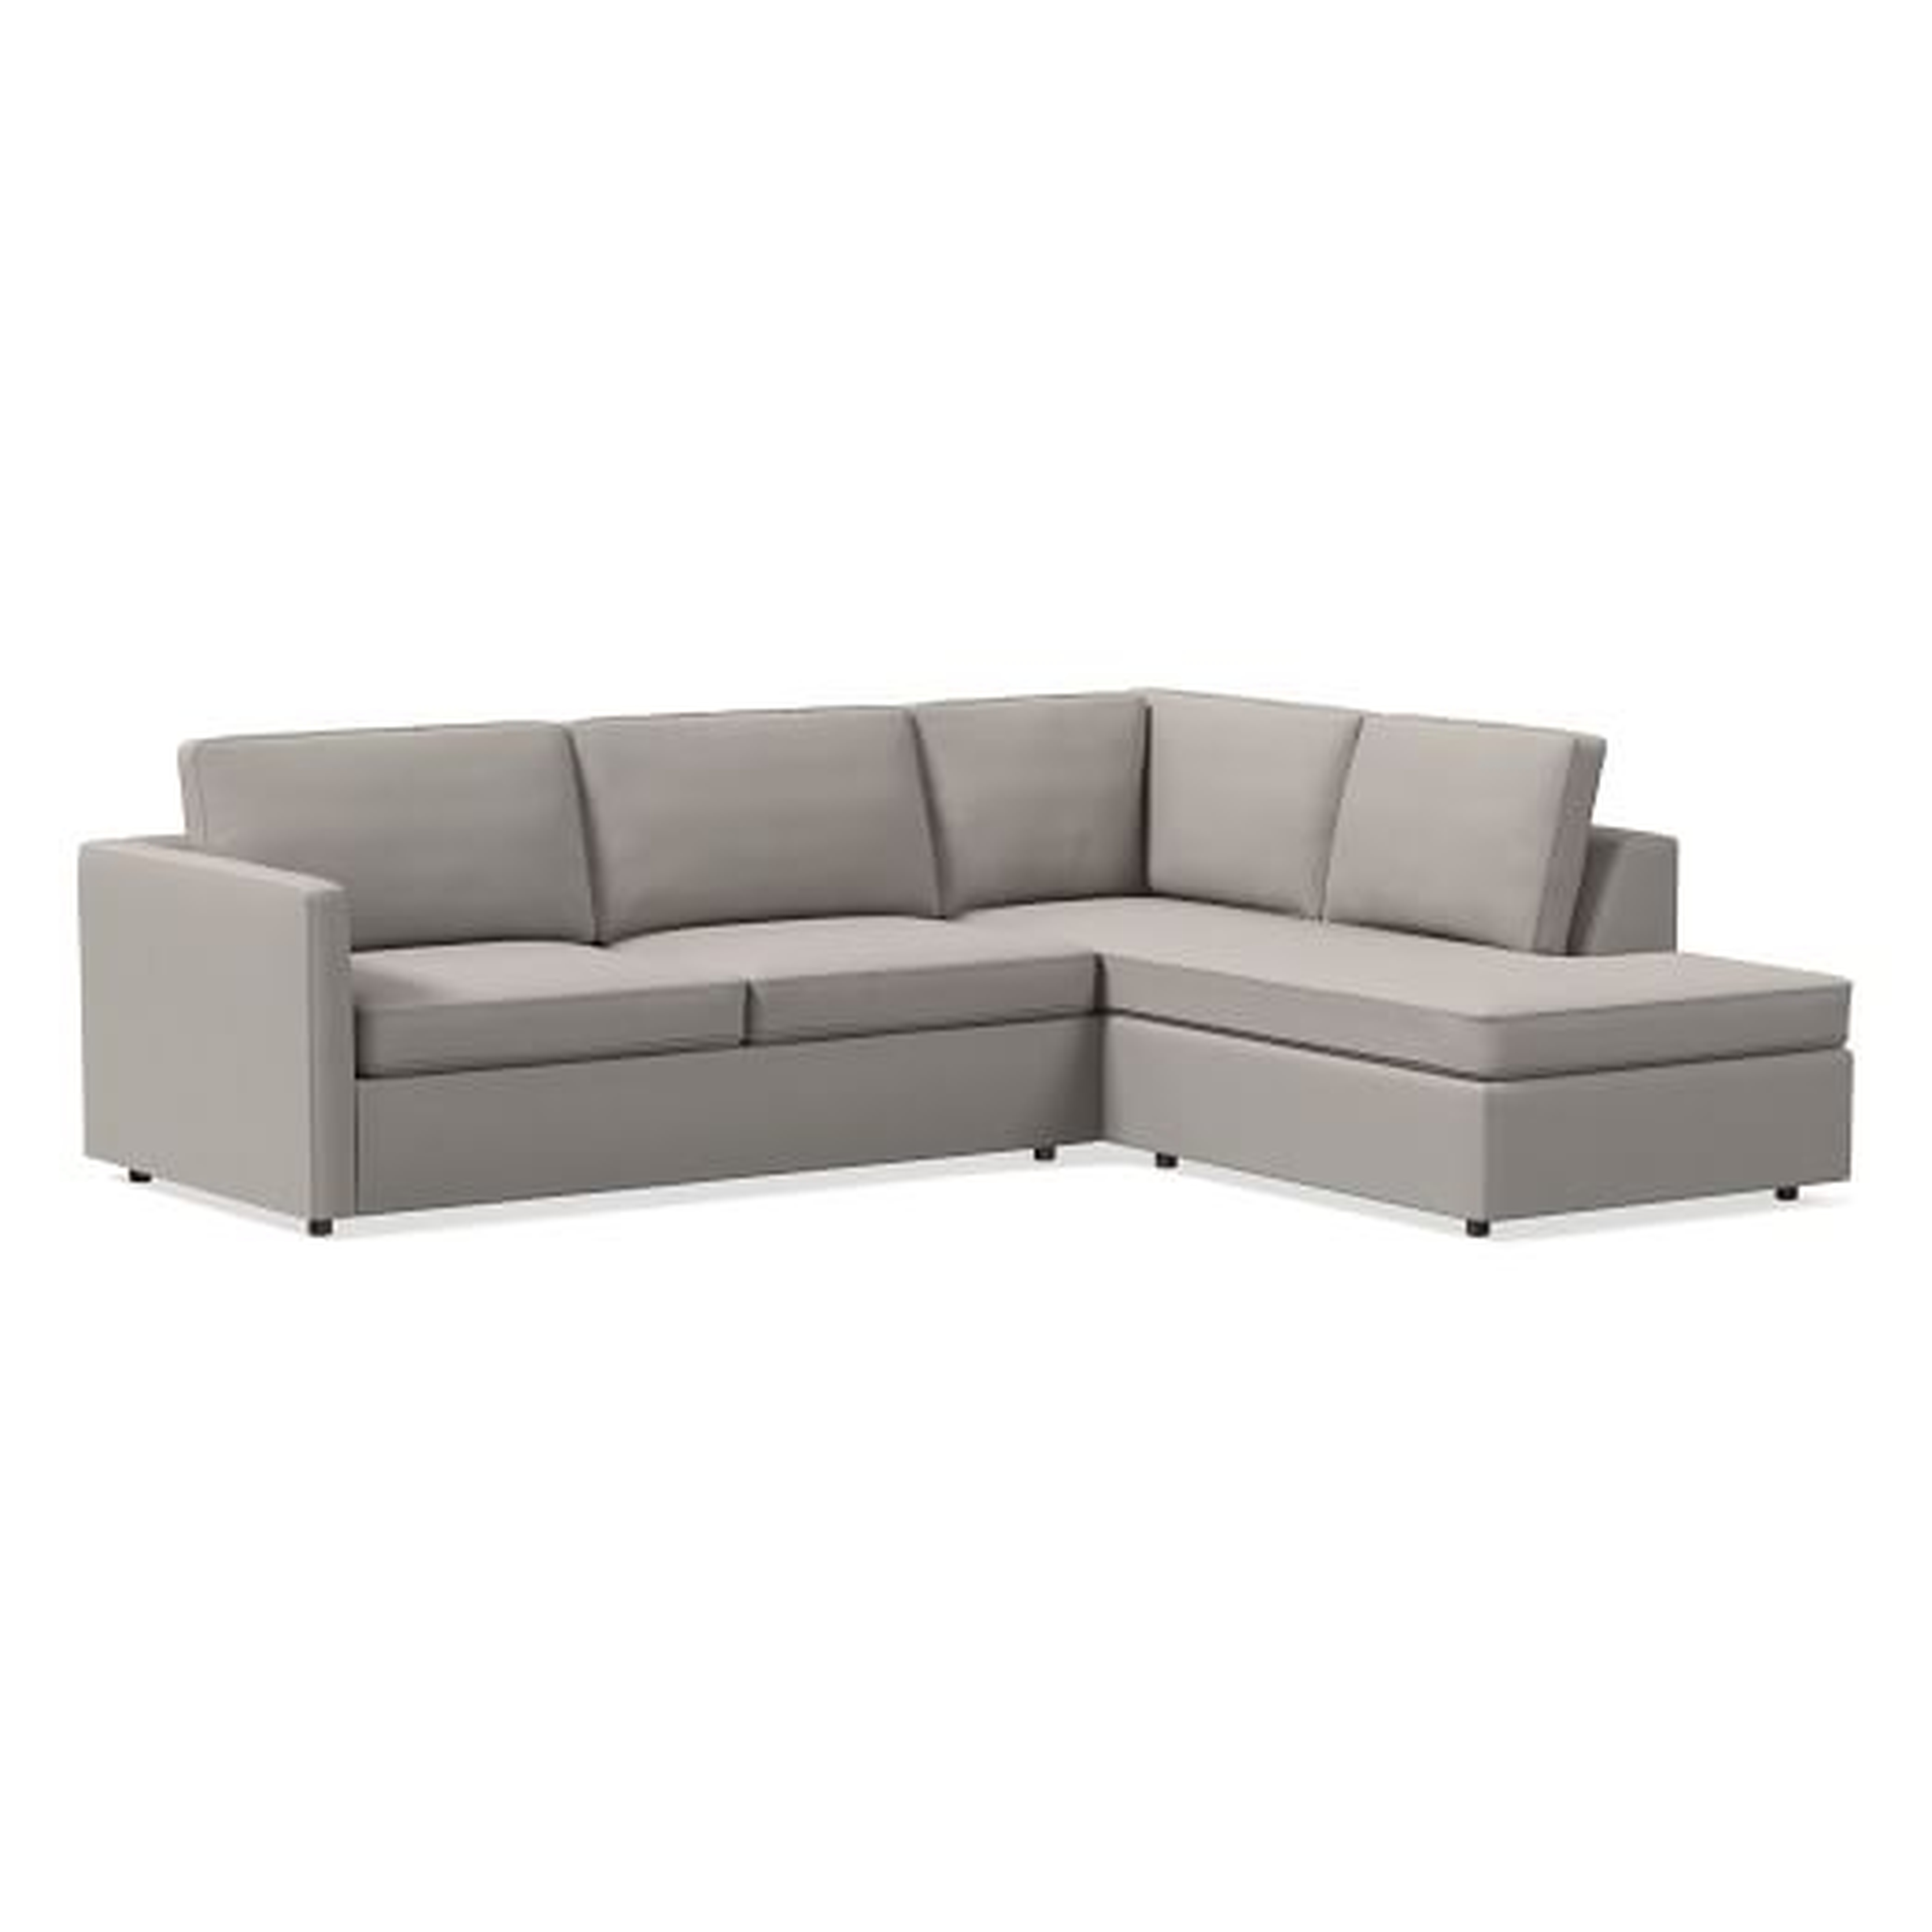 Harris 2-Piece Terminal Chaise Sectional, Large - Right 2-Pc Terminal Chaise Sectional - Performance Velvet, Dove Gray - West Elm